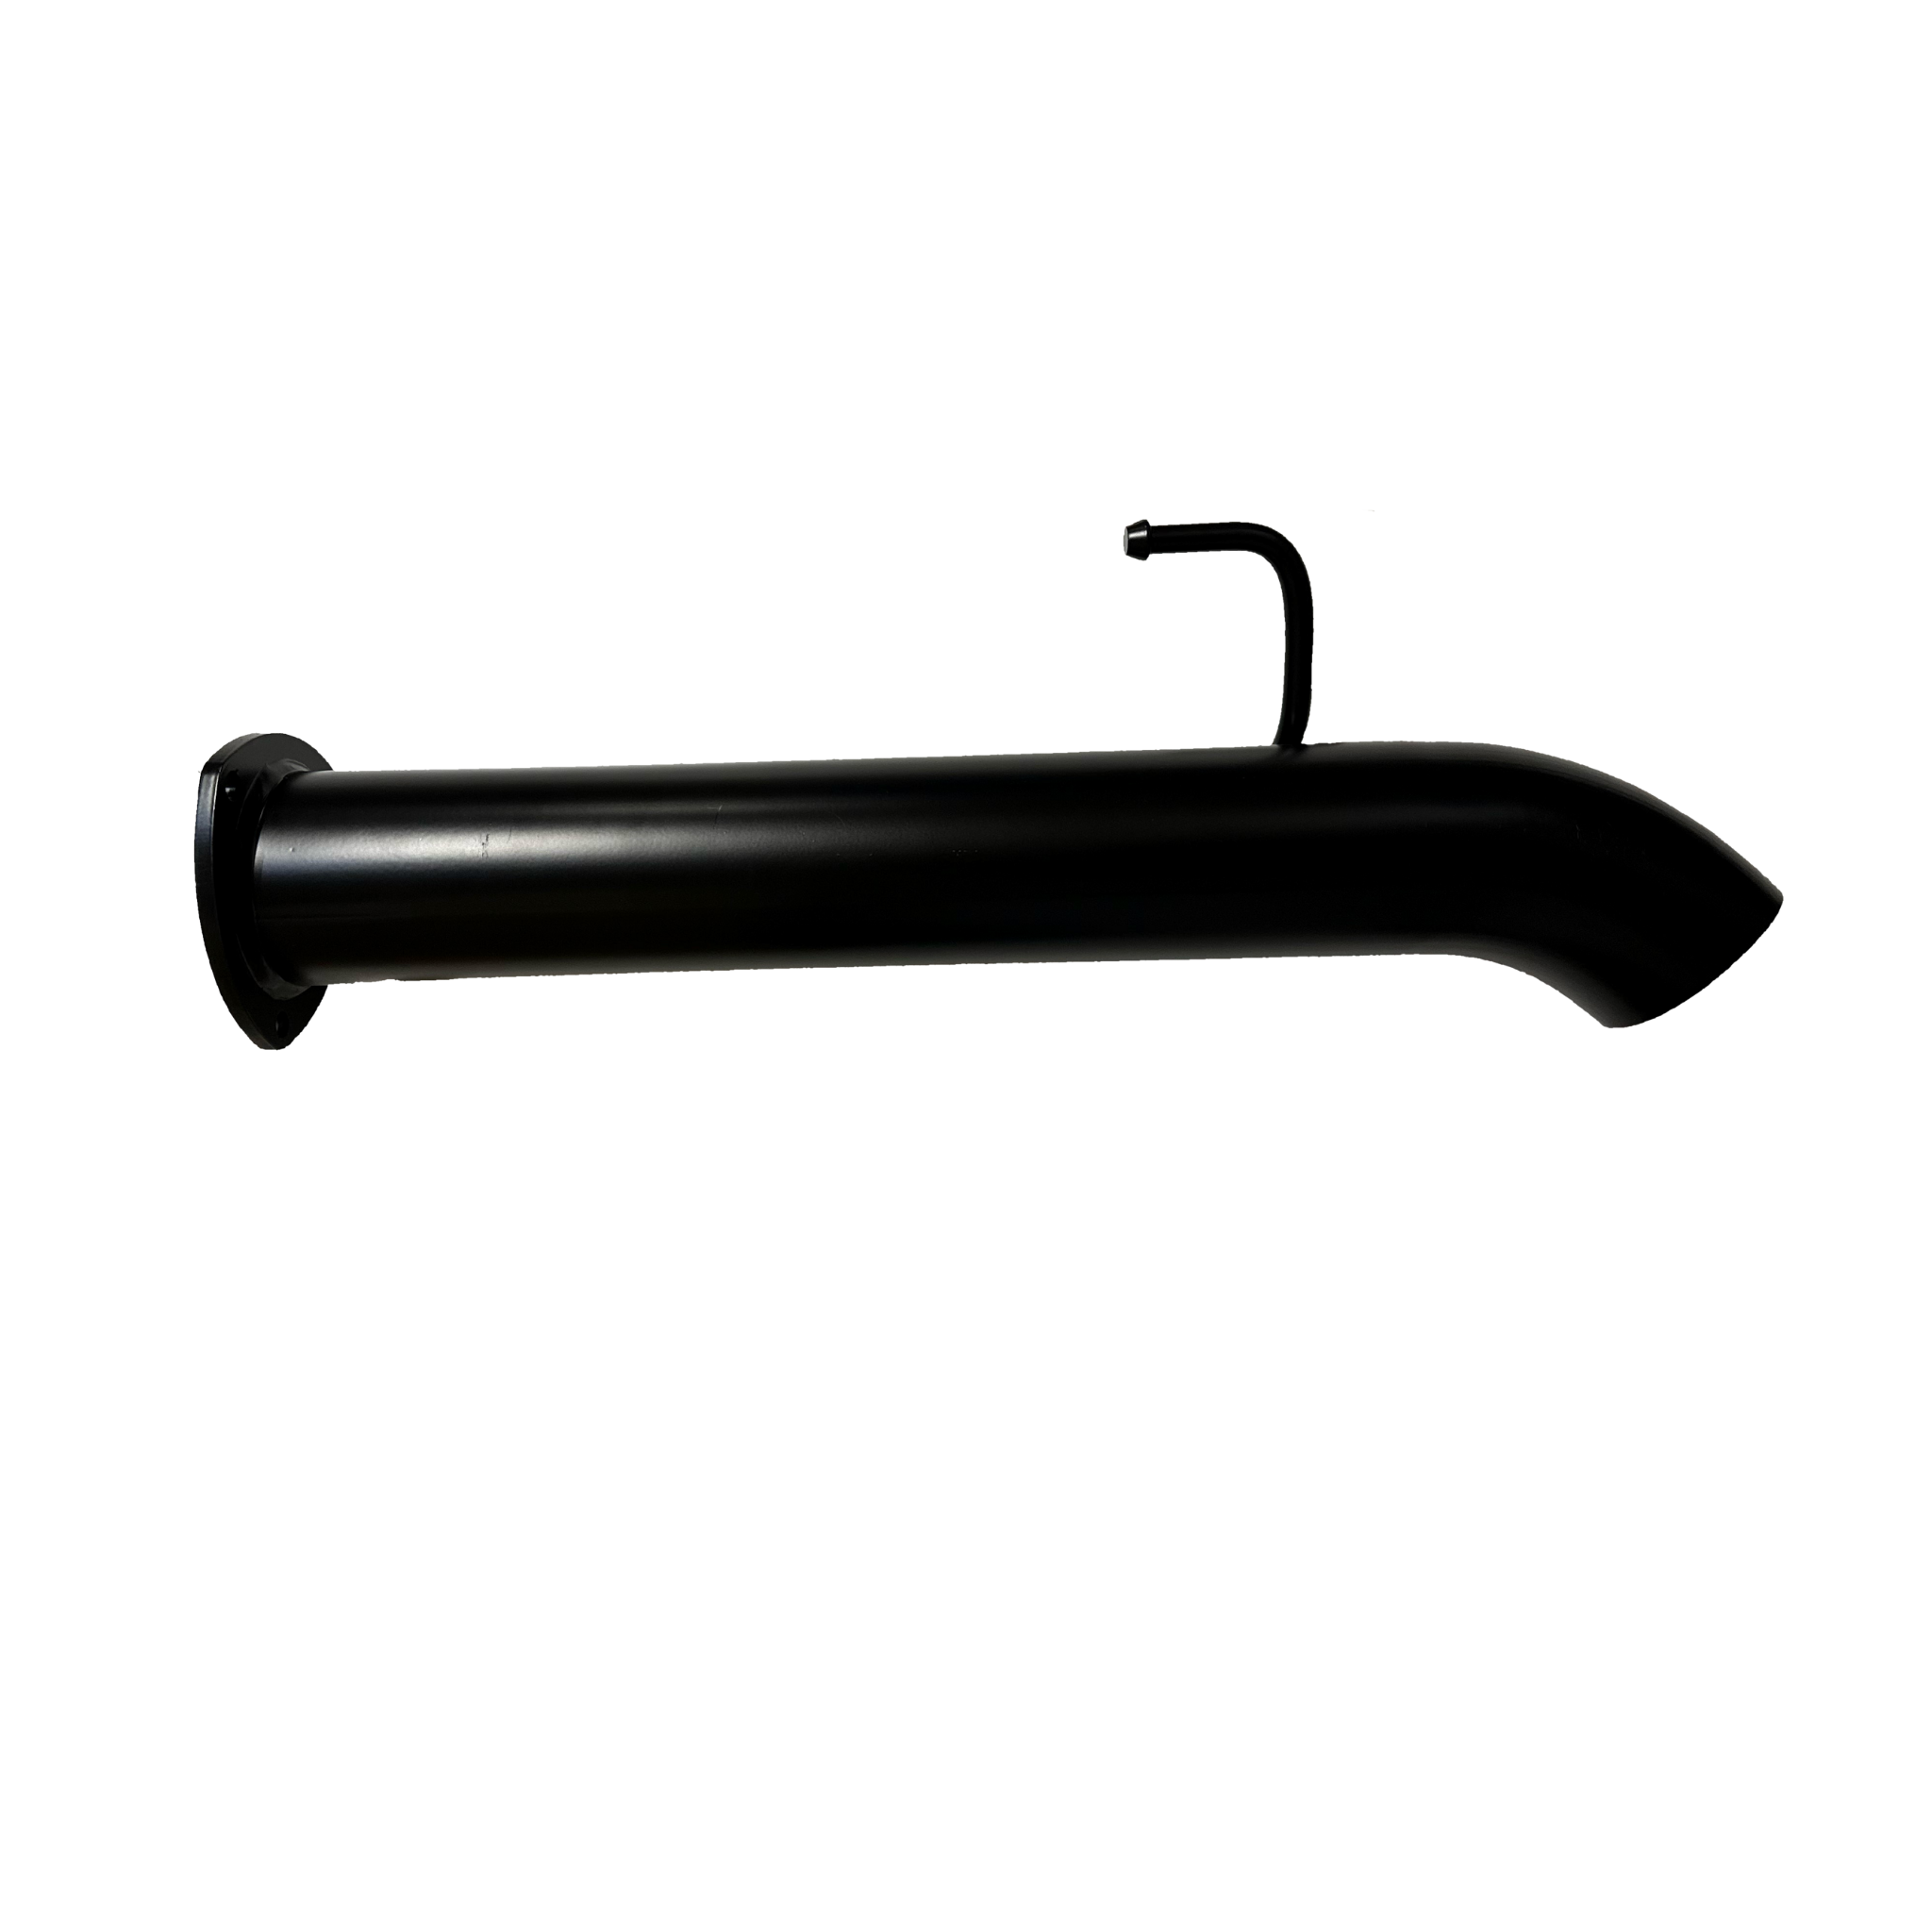 Toyota Landcruiser 200 Series Wagon 2007 - 08/2022 - Rear Muffler Delete Pipe To Suit TOY11SS & TOY27SS